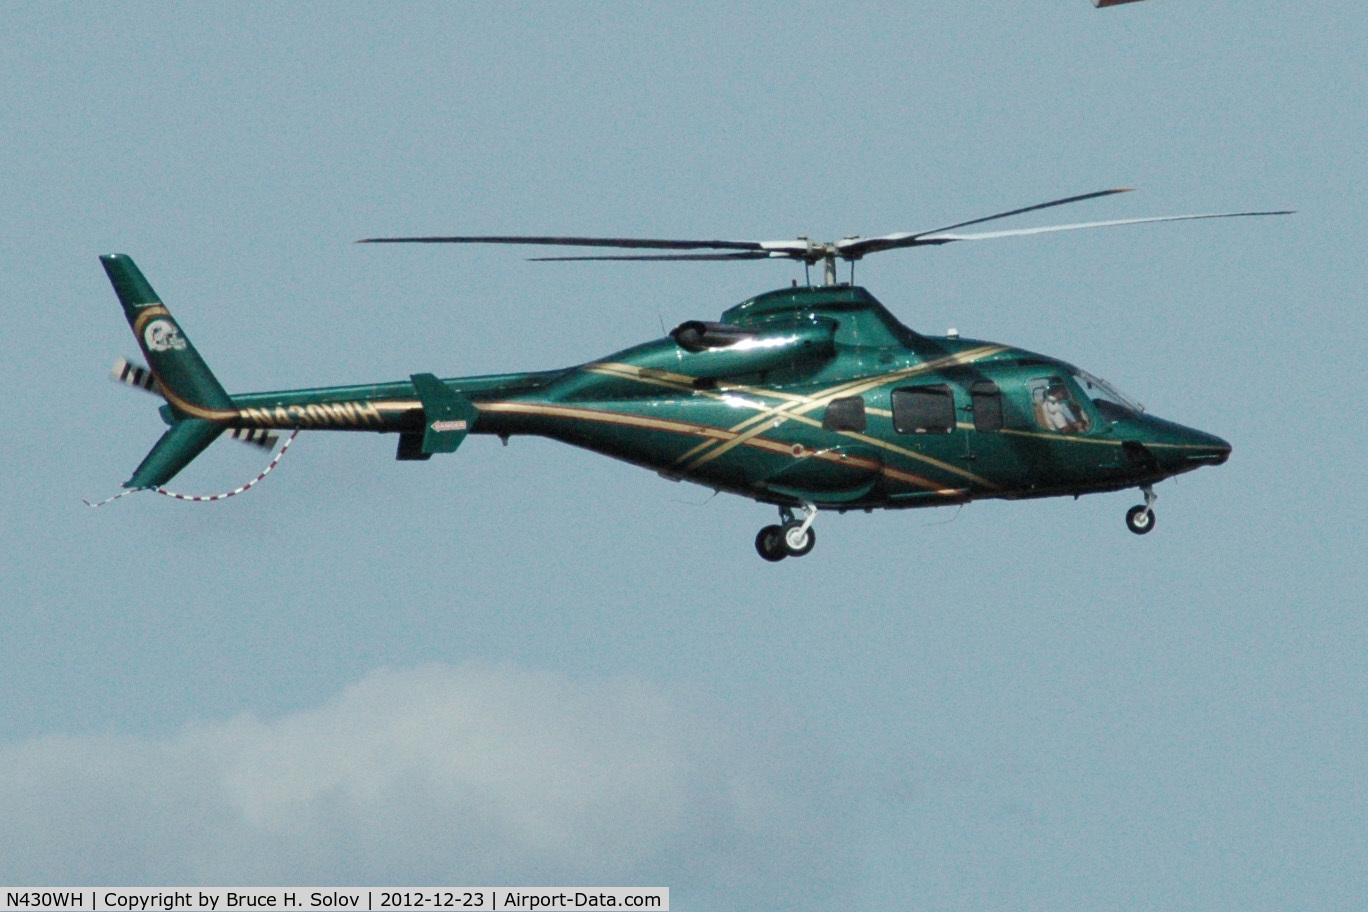 N430WH, 2006 Bell 430 C/N 49114, Taken while attending a Miami Dolphins football game, flying over Sun Life Stadium in Miami, FL